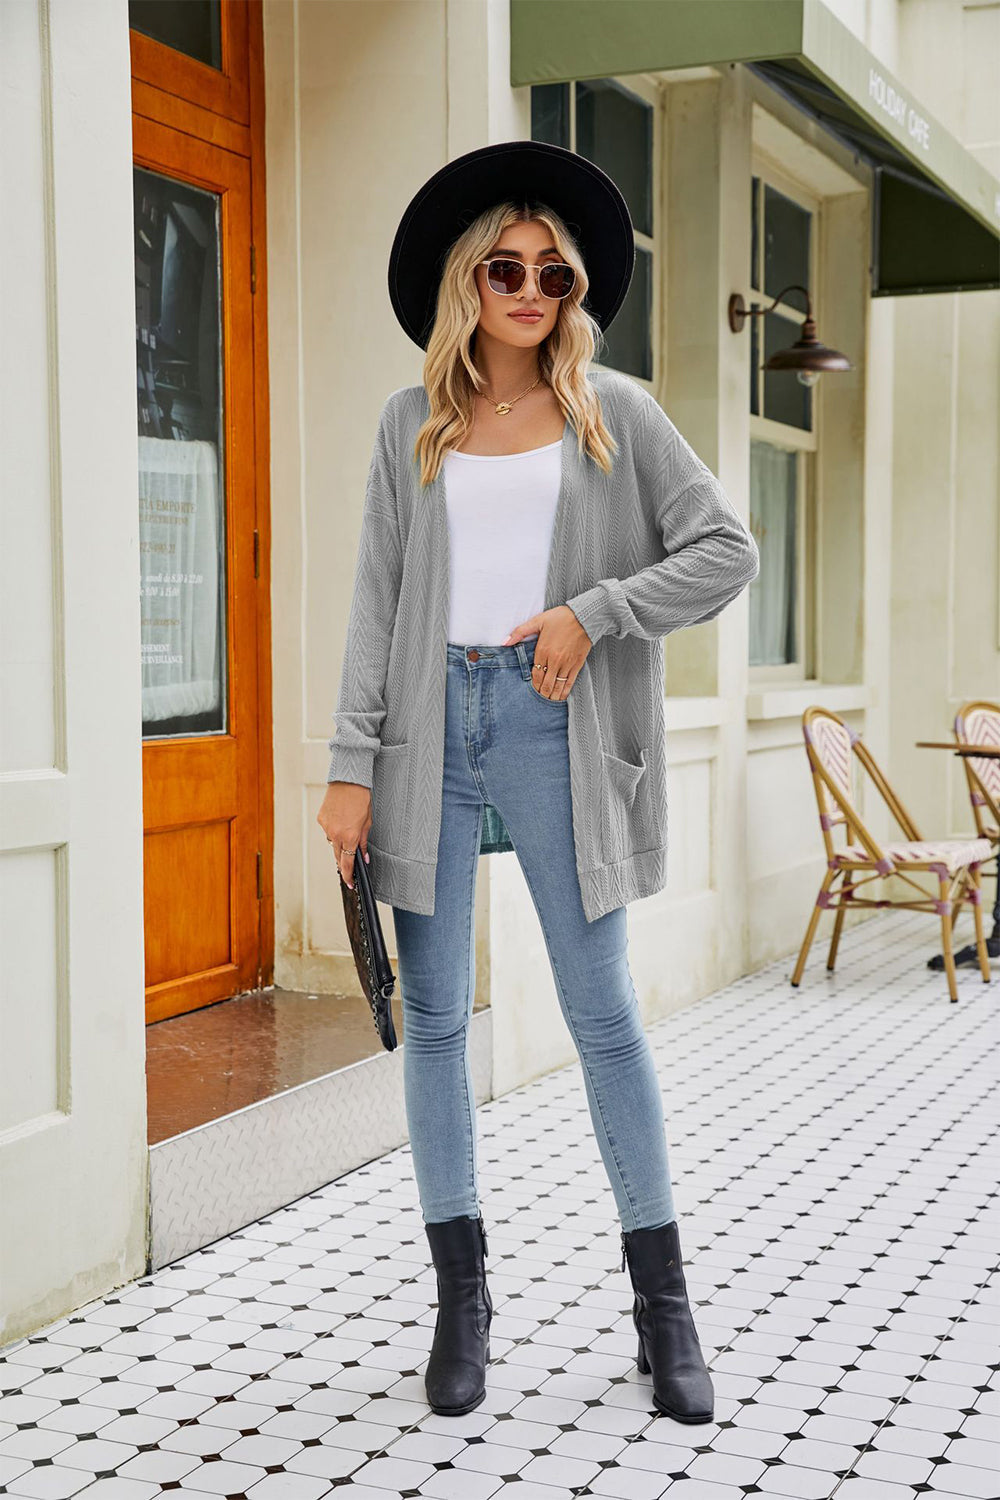 Long Sleeve Pocketed Cardigan - Light Gray / S - Women’s Clothing & Accessories - Shirts & Tops - 1 - 2024